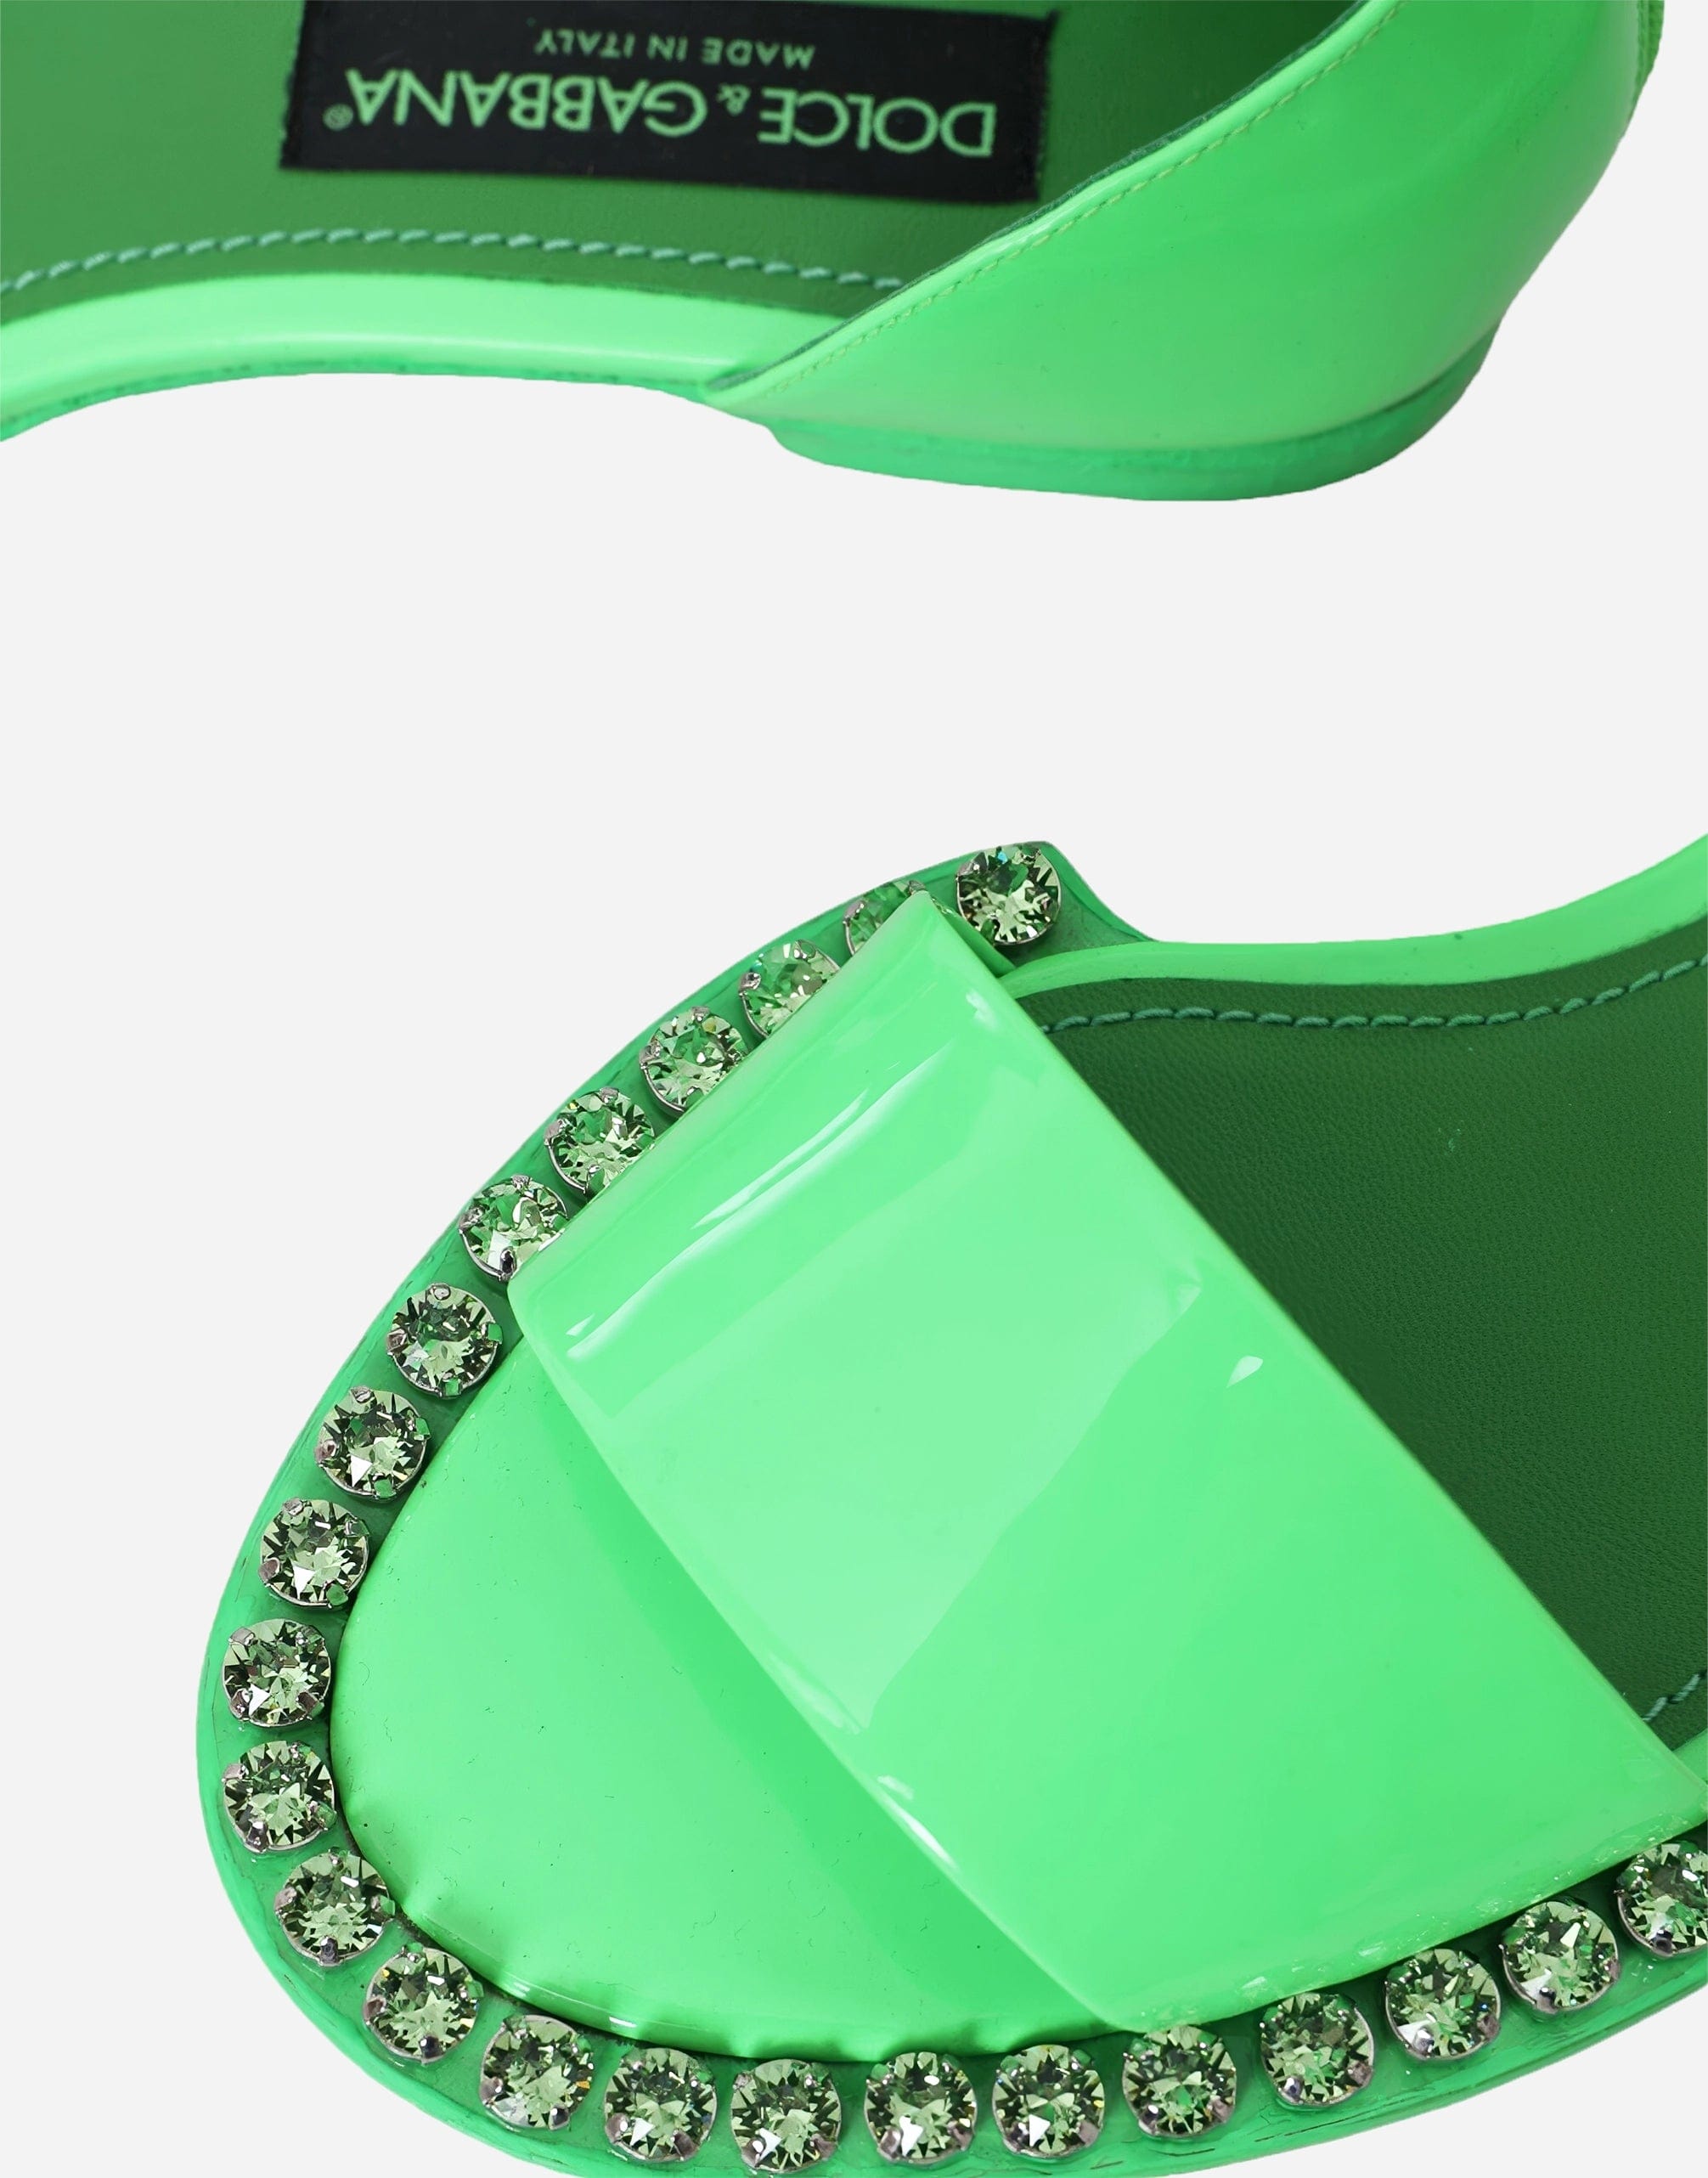 Dolce & Gabbana Neon Green Crystal Ankle Strap Sandals Shoes